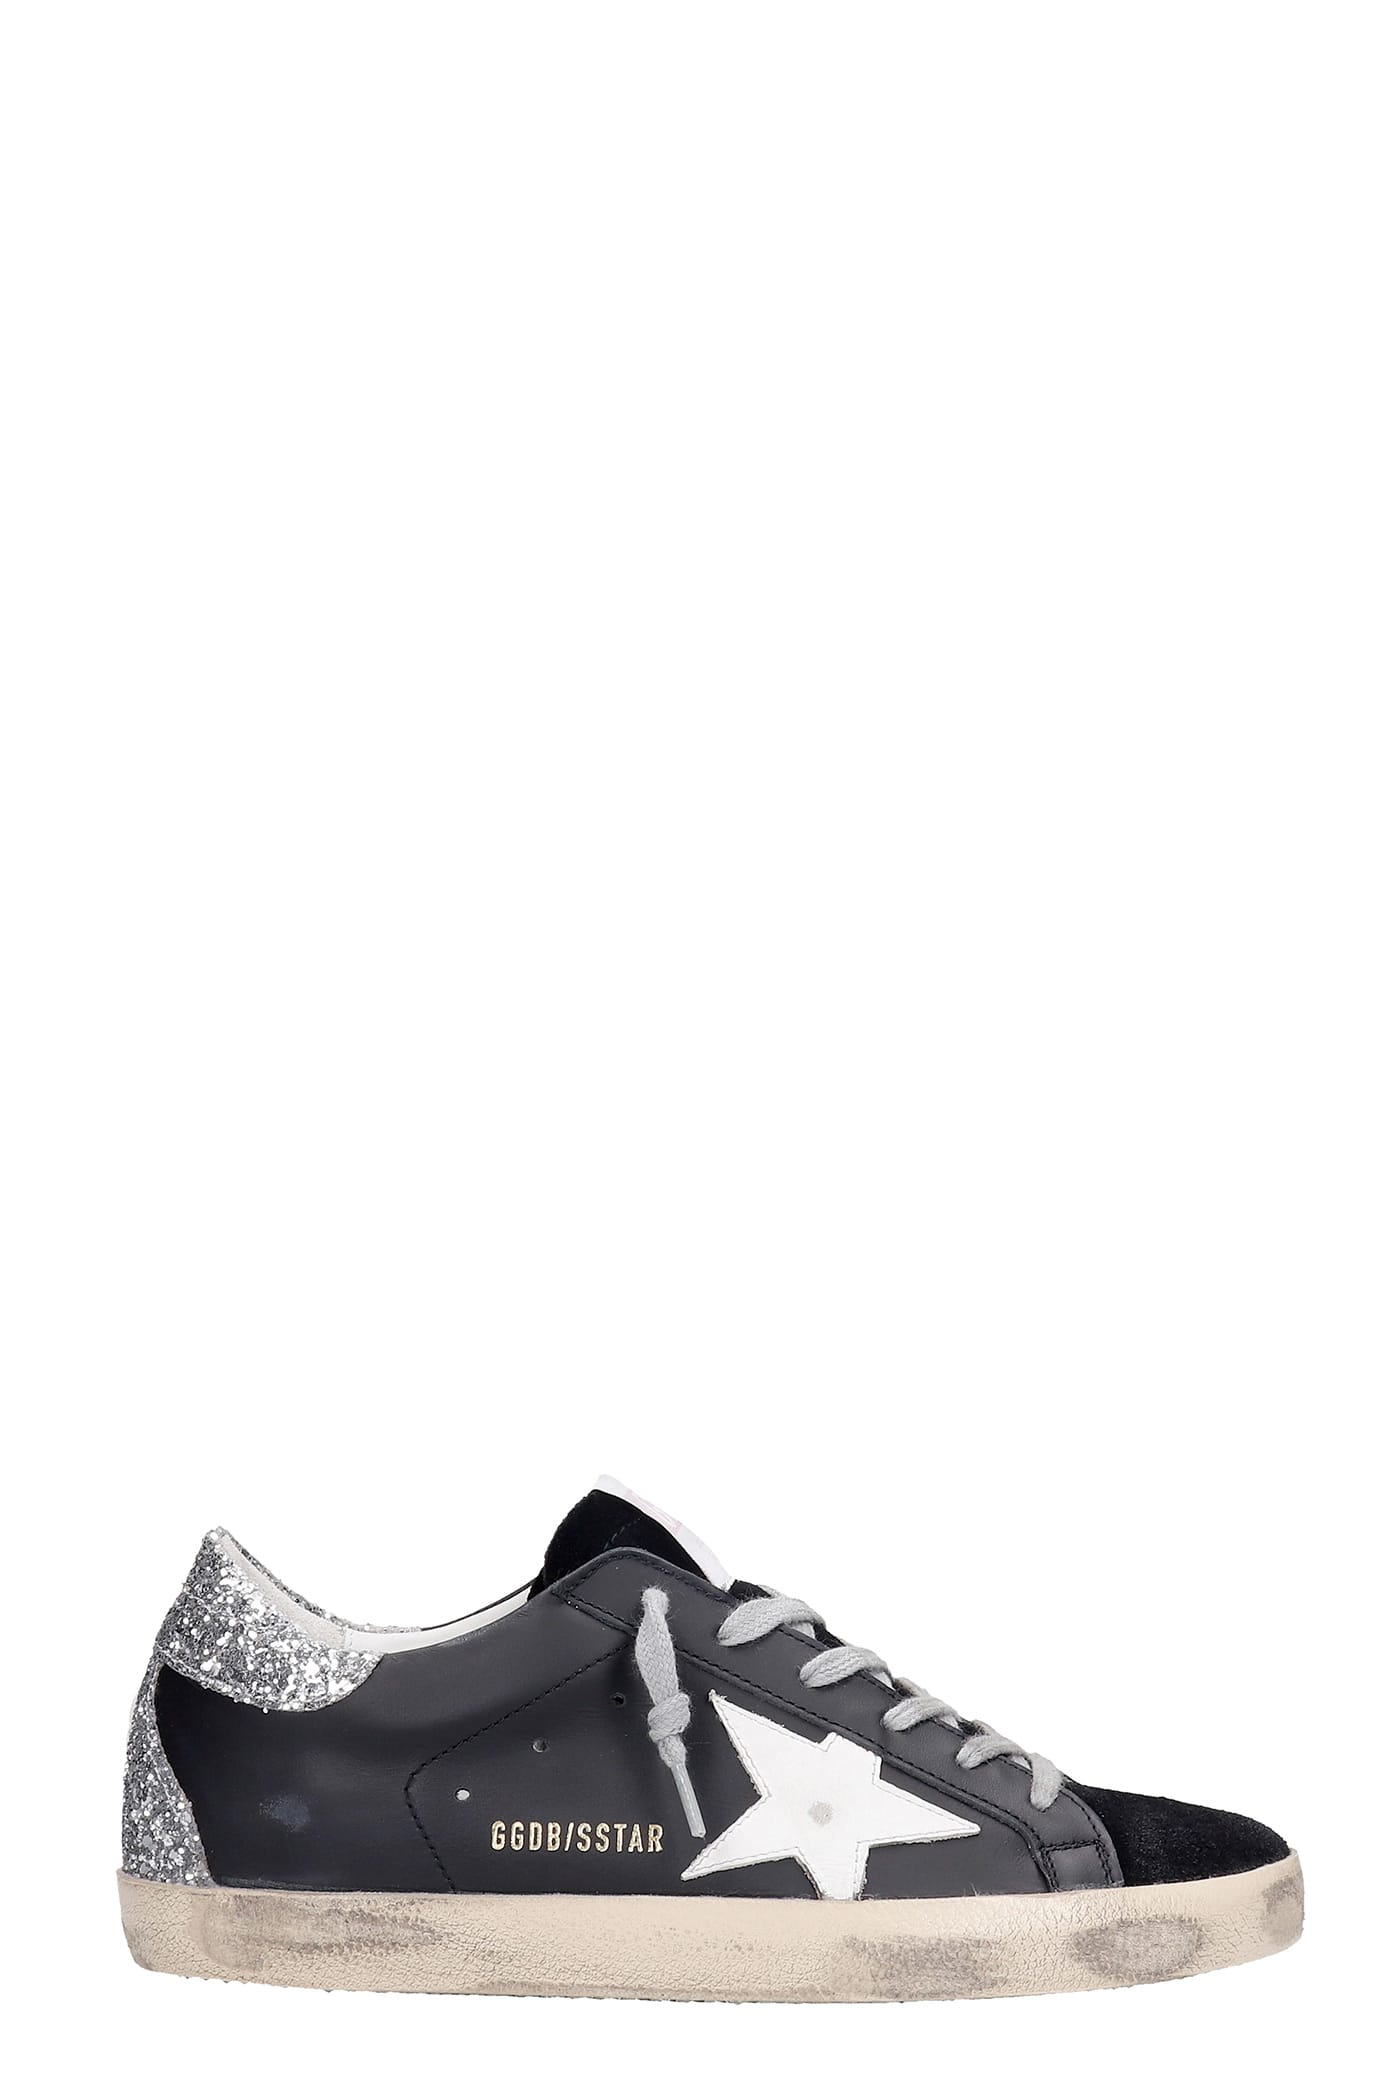 Buy Golden Goose Superstar Sneakers In Black Suede And Leather online, shop Golden Goose shoes with free shipping